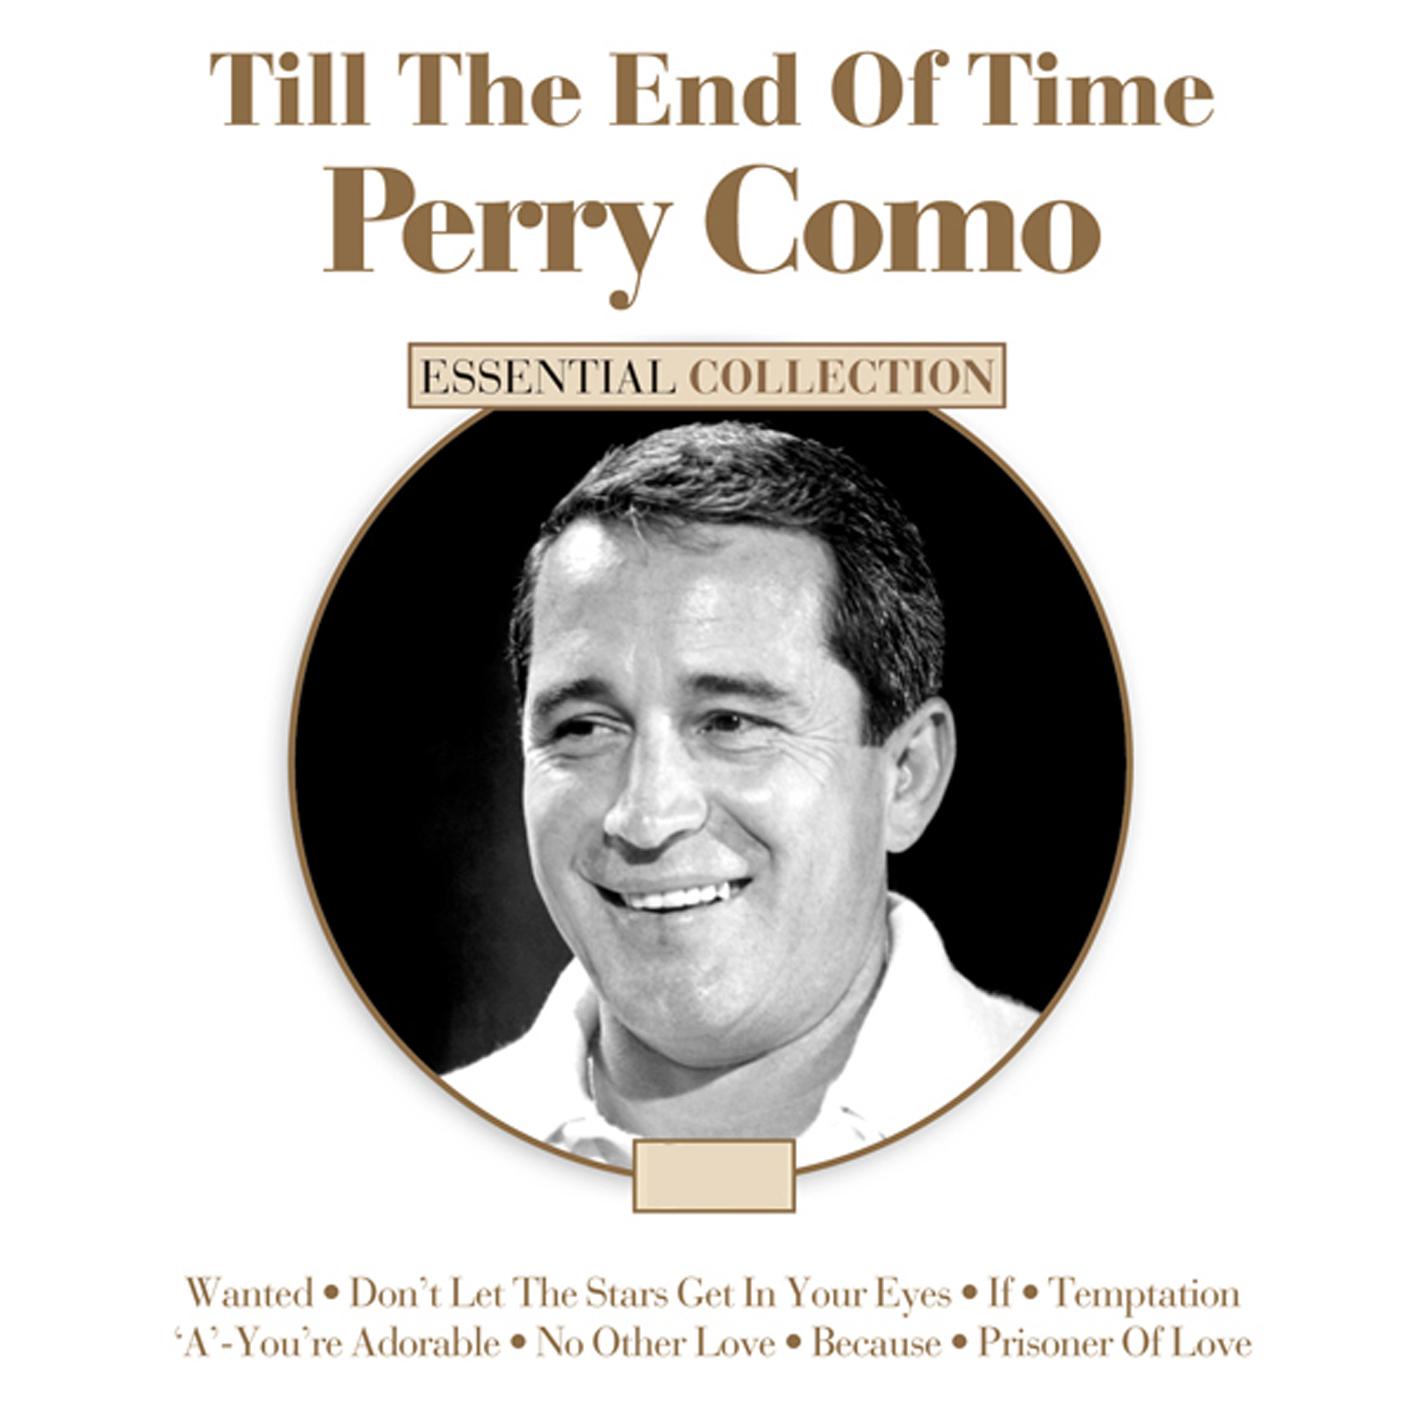 Till the End of Time - Perry Como